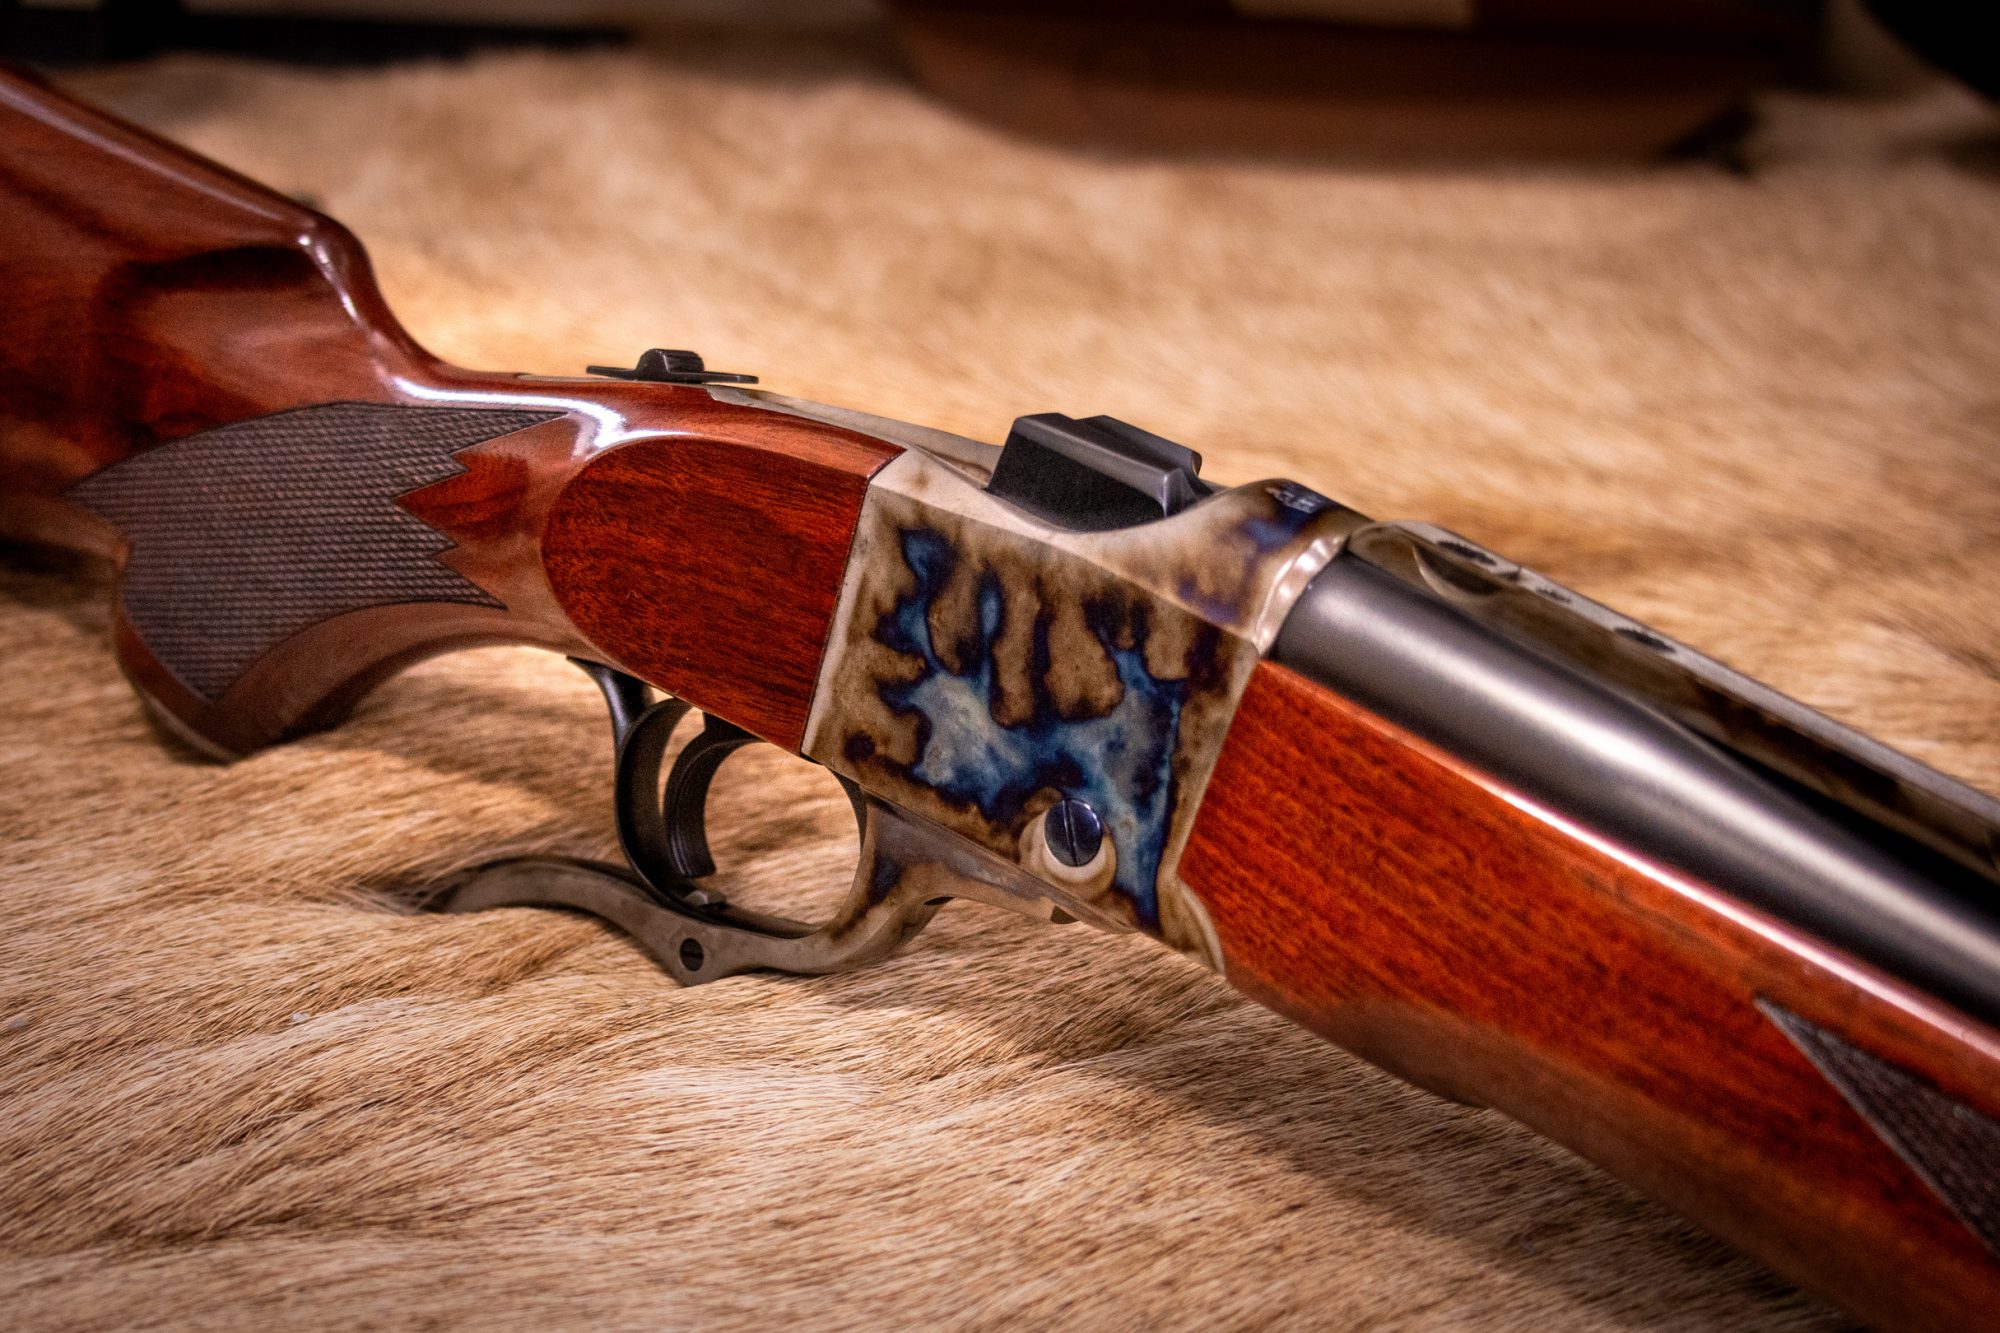 Photo of Ruger No 1 rifle, fully refinished by Turnbull Restoration, featuring bone charcoal color case hardening and hand re-finished wood